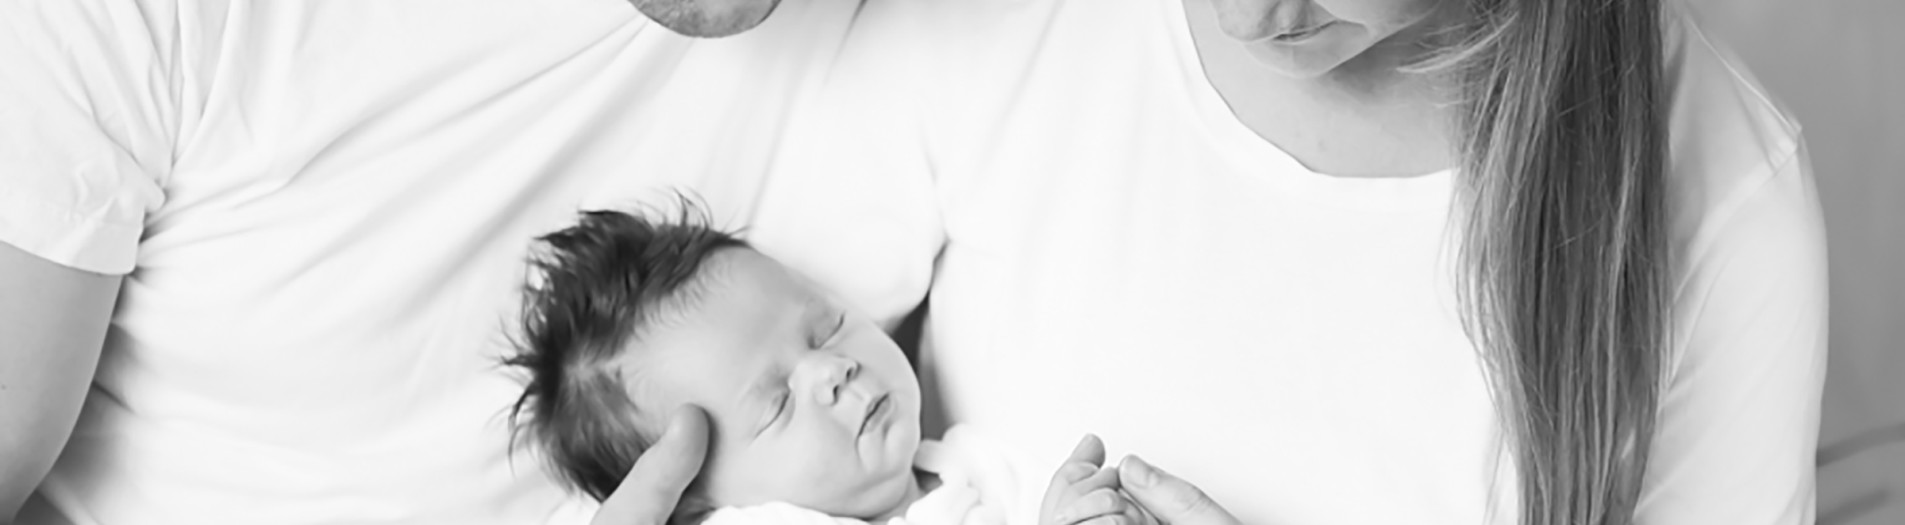 Newborn with New-Parents | Family Photography Dublin